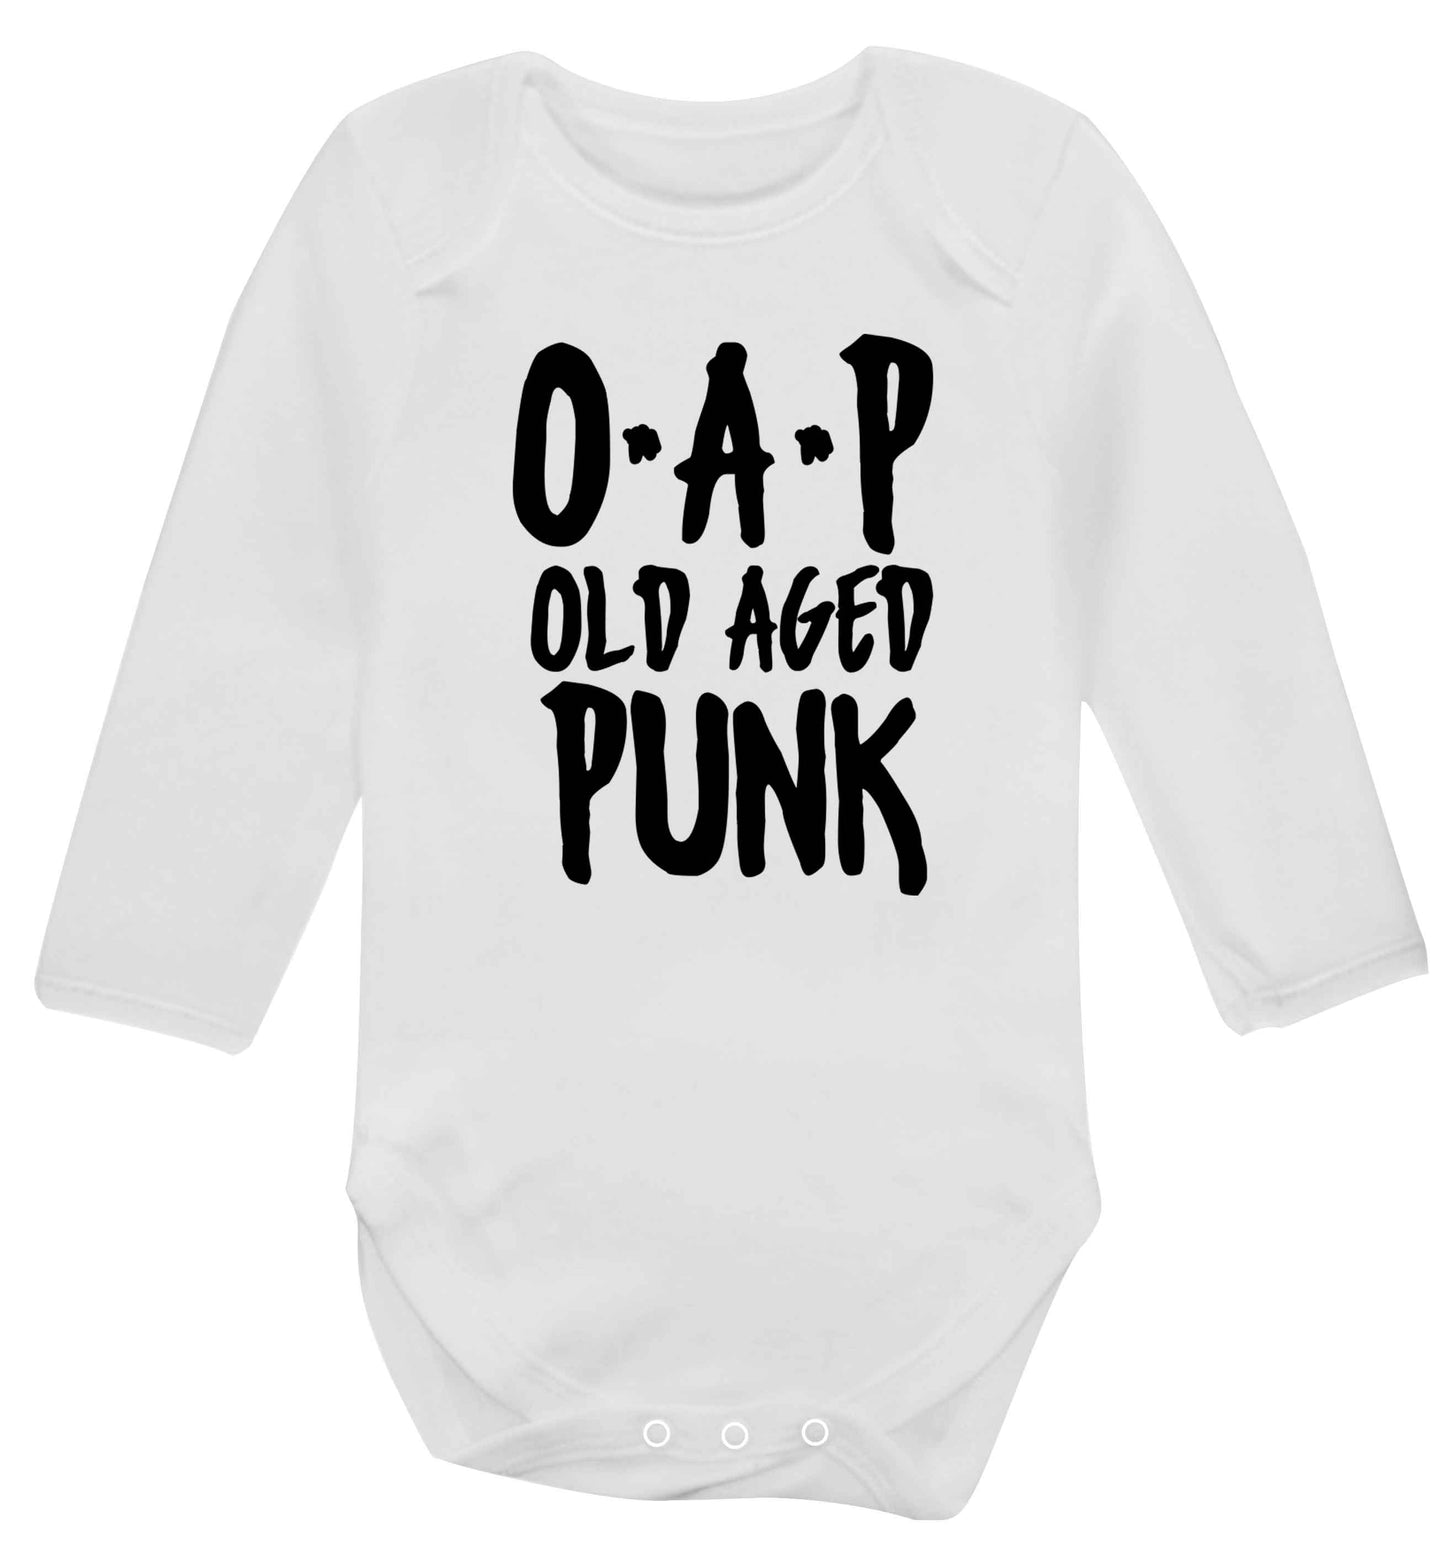 O.A.P Old Age Punk Baby Vest long sleeved white 6-12 months